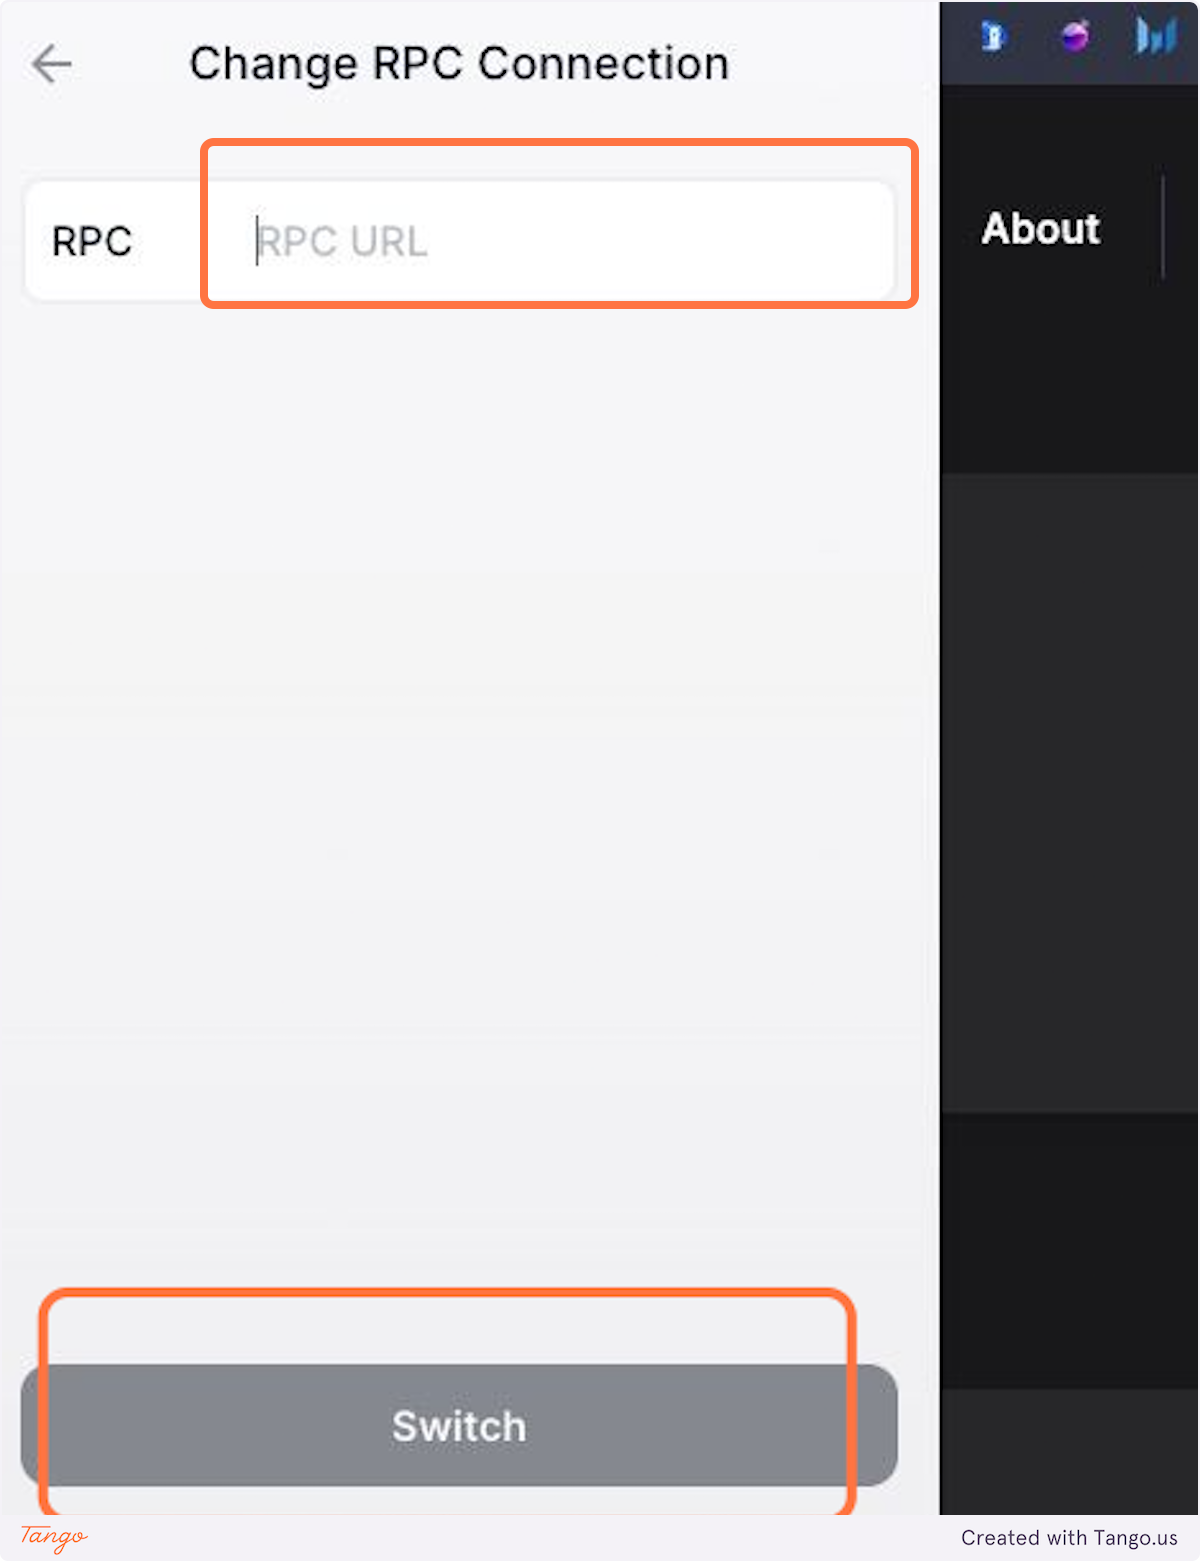 Paste the URL RPC from Helius and click on Switch